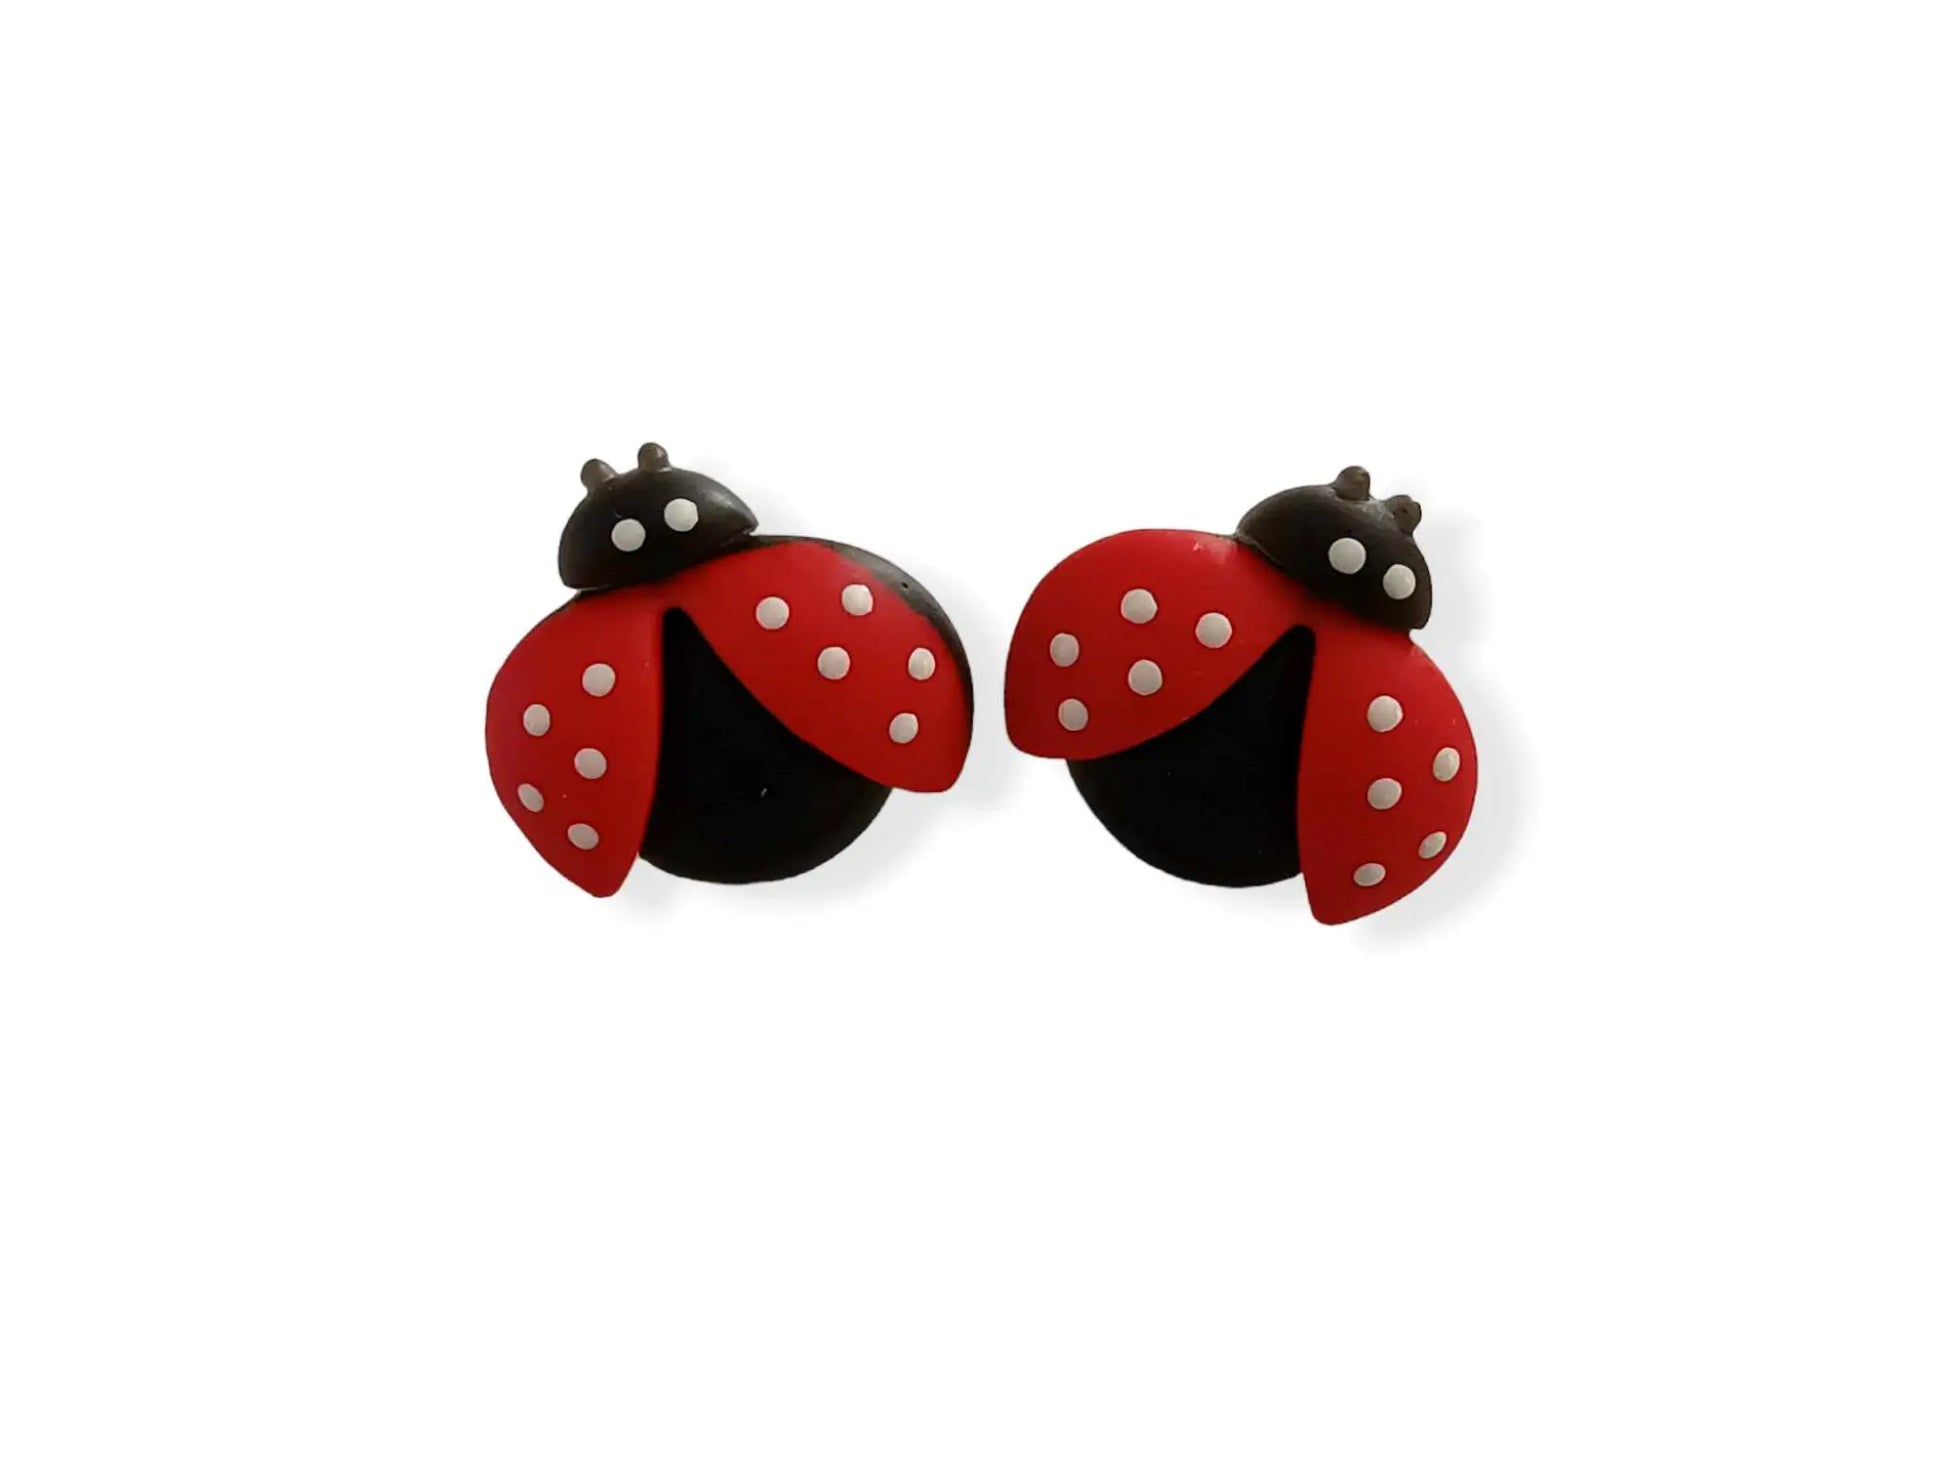 Charming Ladybird Resin Earrings - A Novelty Delight! - Image #1